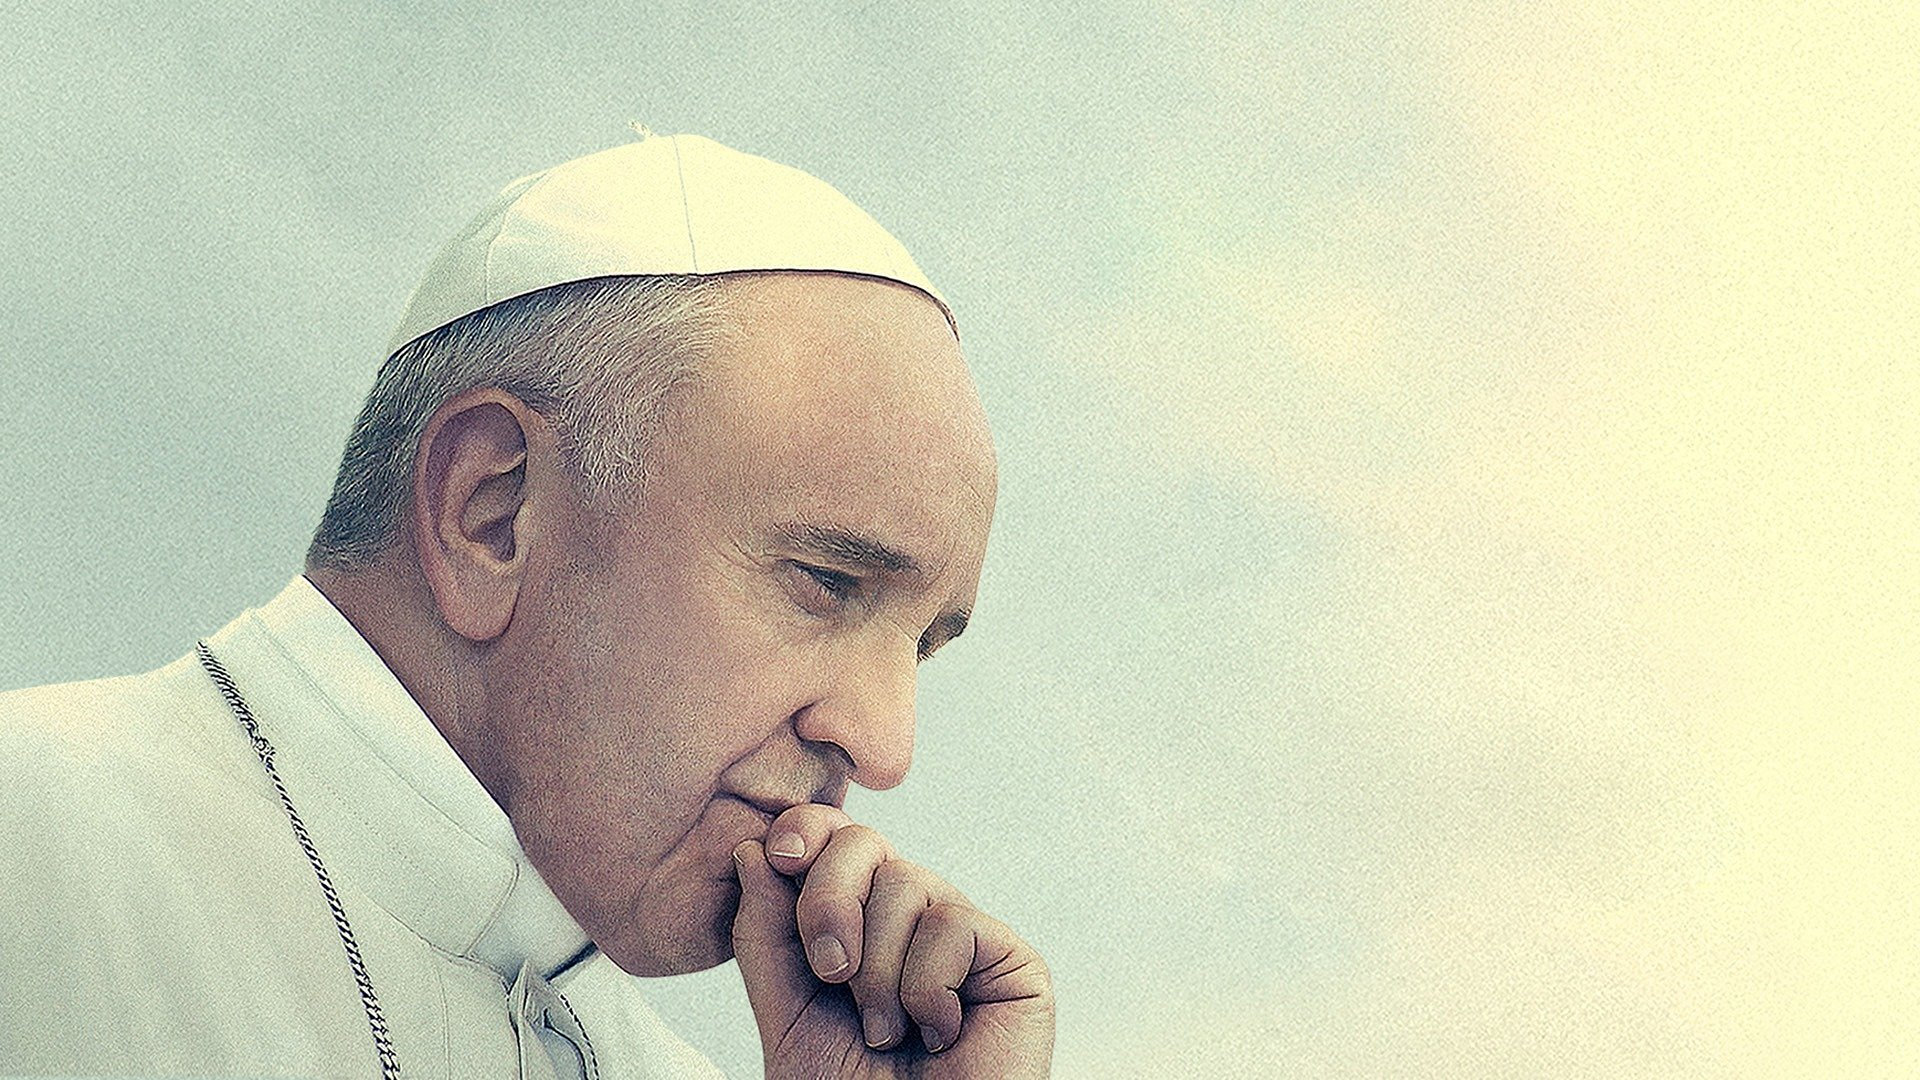 Pope Francis: A Man of his words